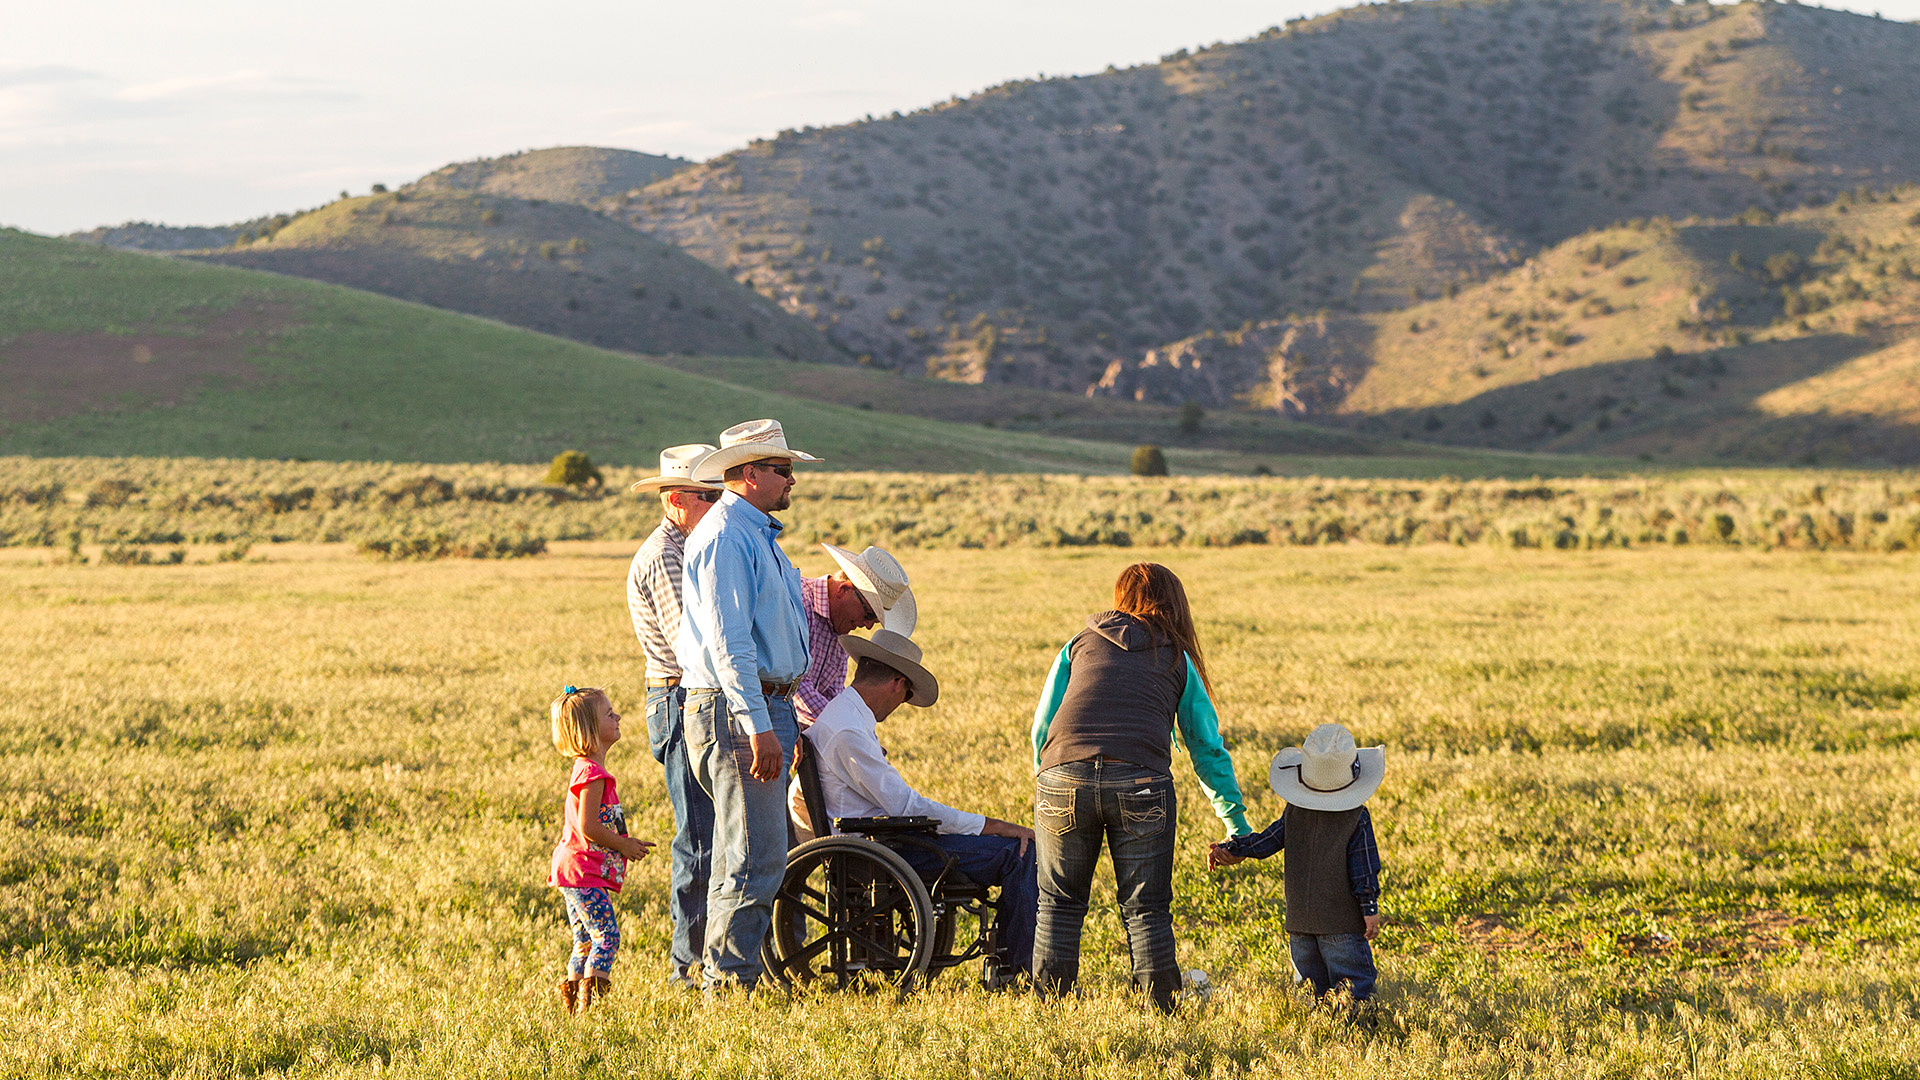 Disability Rates Higher in Rural Areas Than Urban Areas